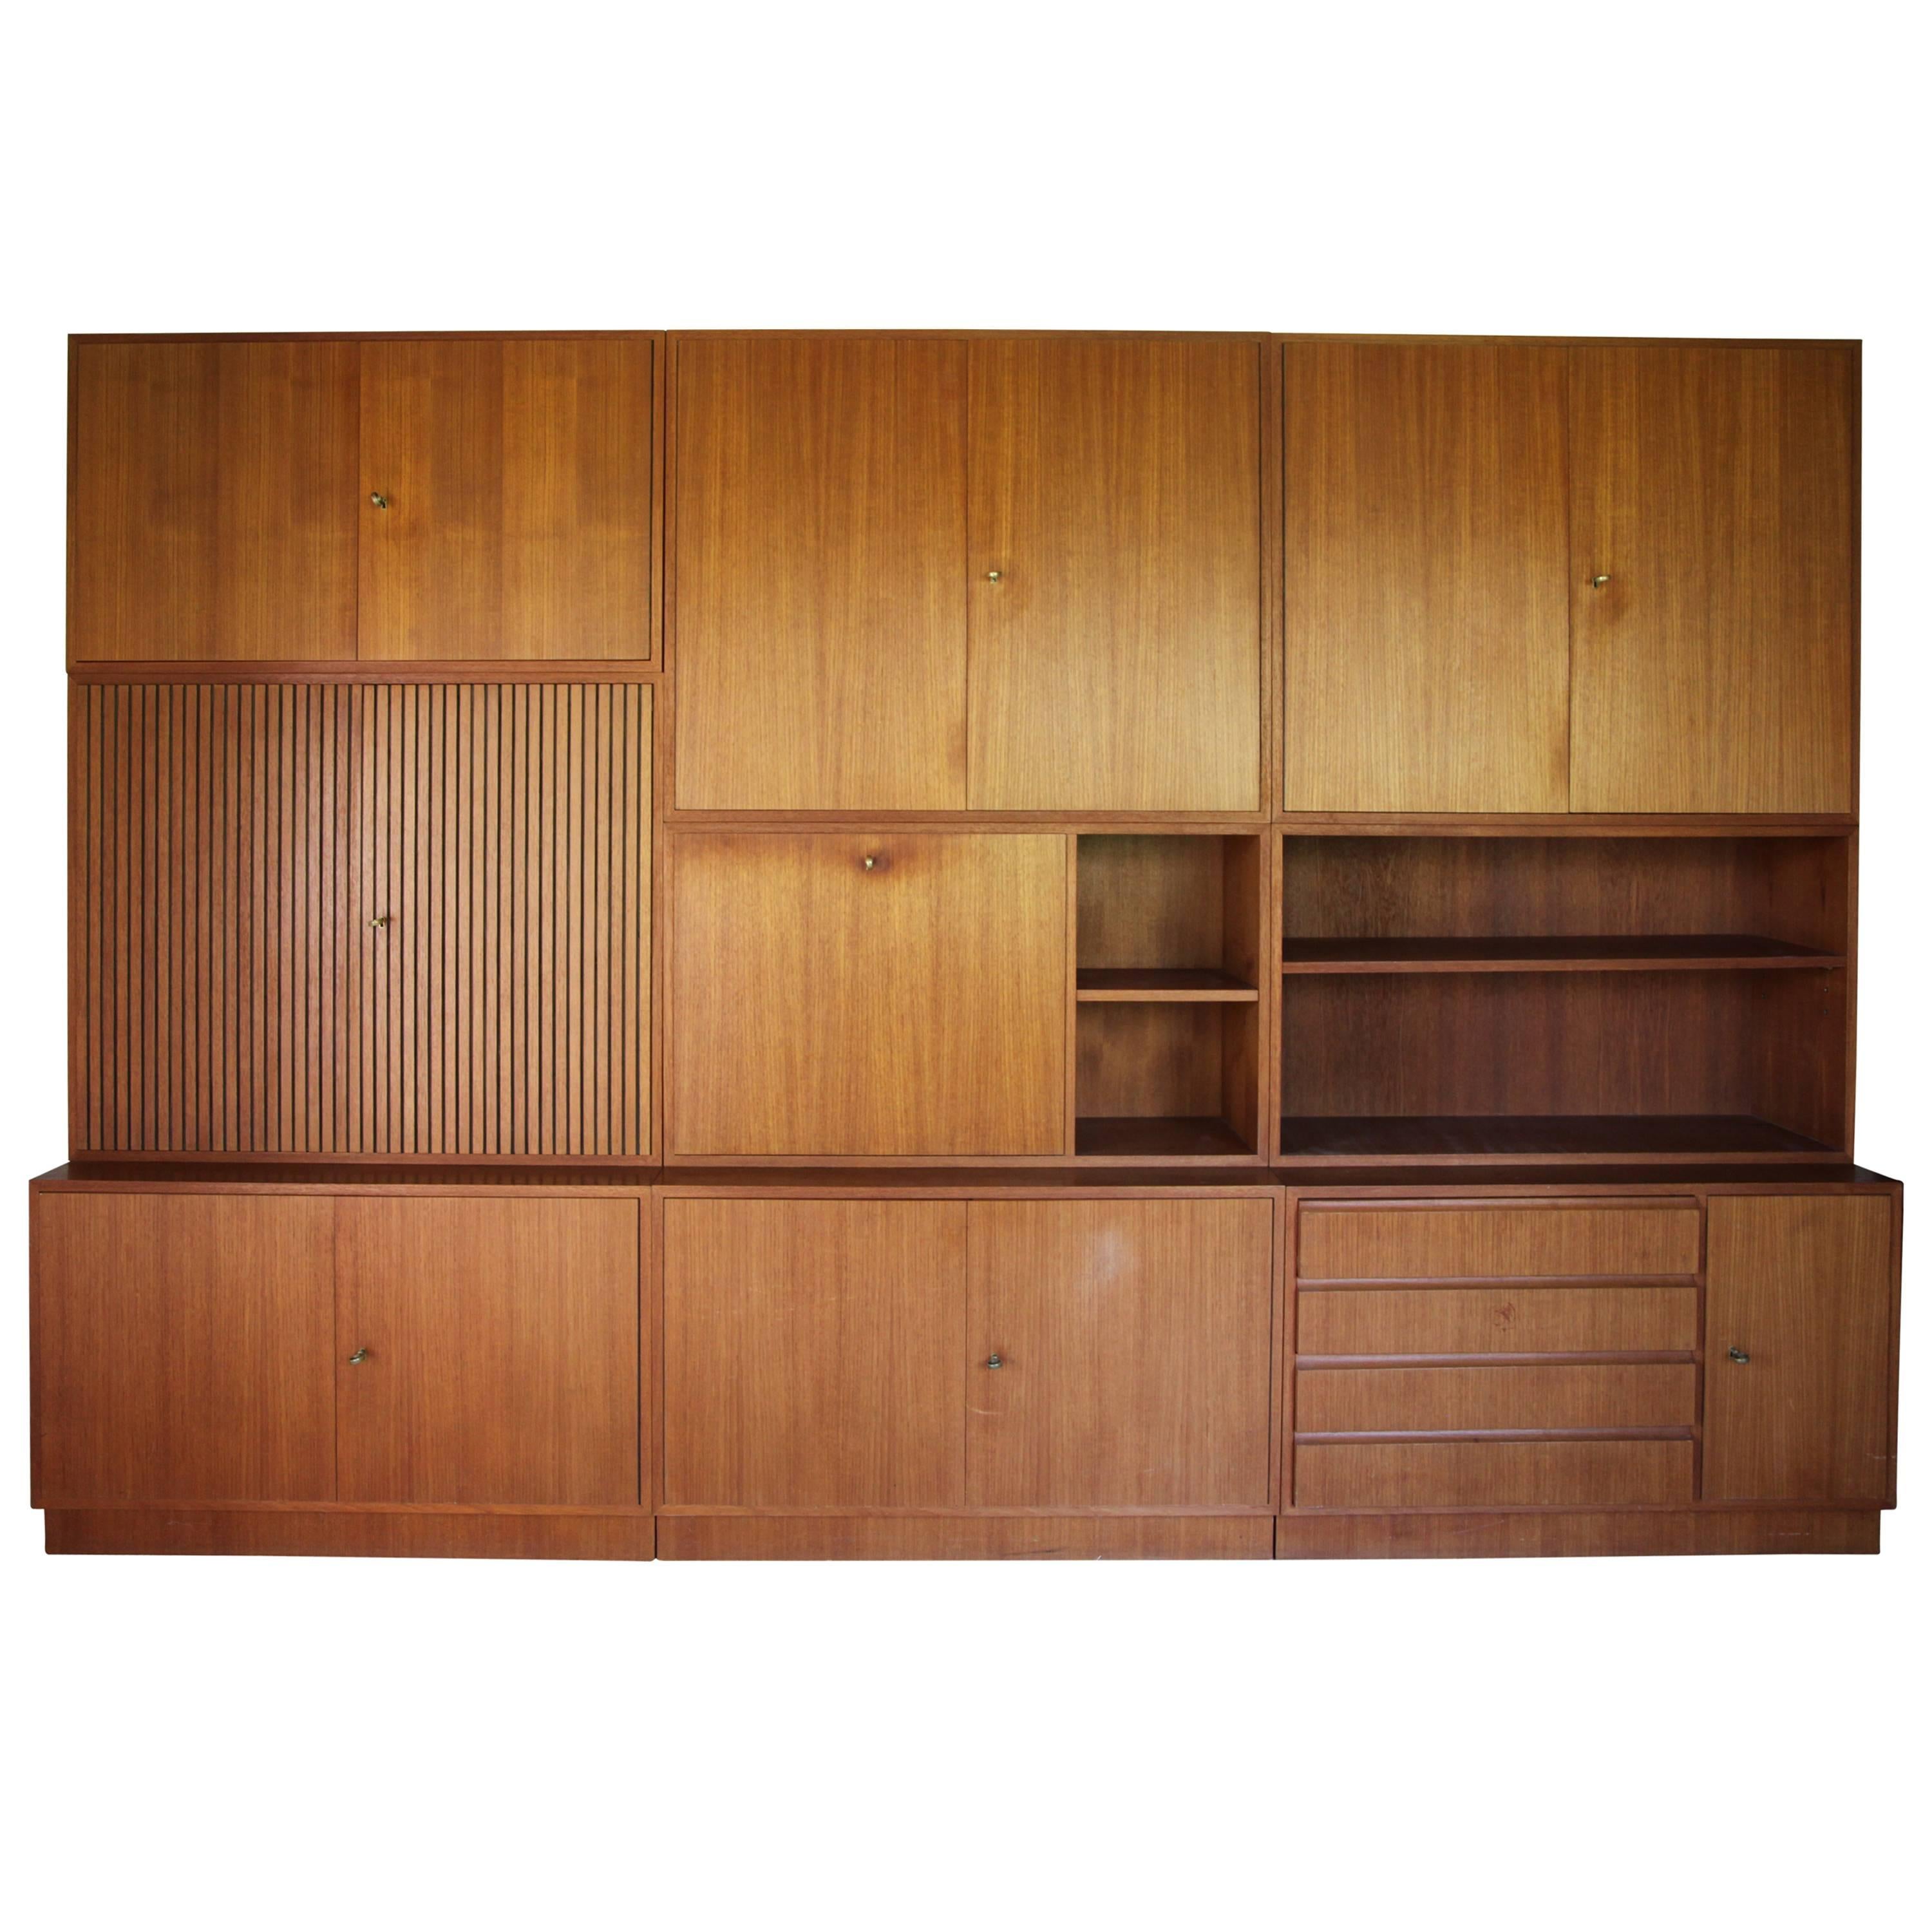 Modular Wall Unit Designed by Georg Satink for WK Möbel, Germany, 1952